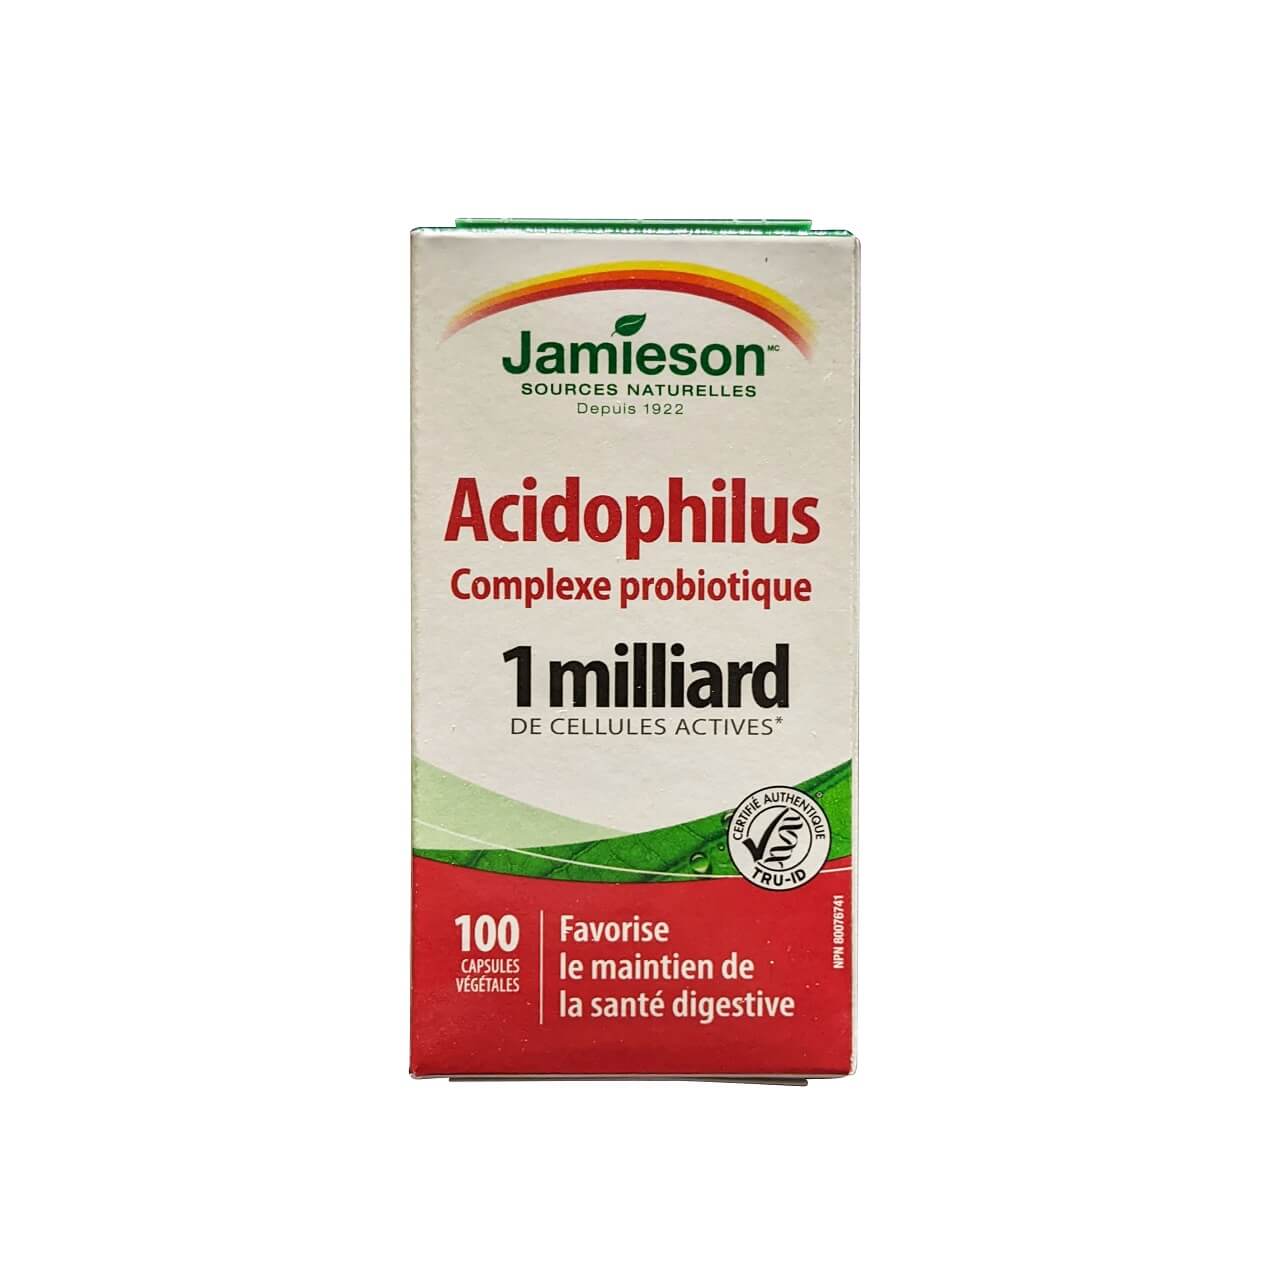 Product label for Jamieson Acidophilus Probiotic Complex 1 Billion (100 capsules) in French